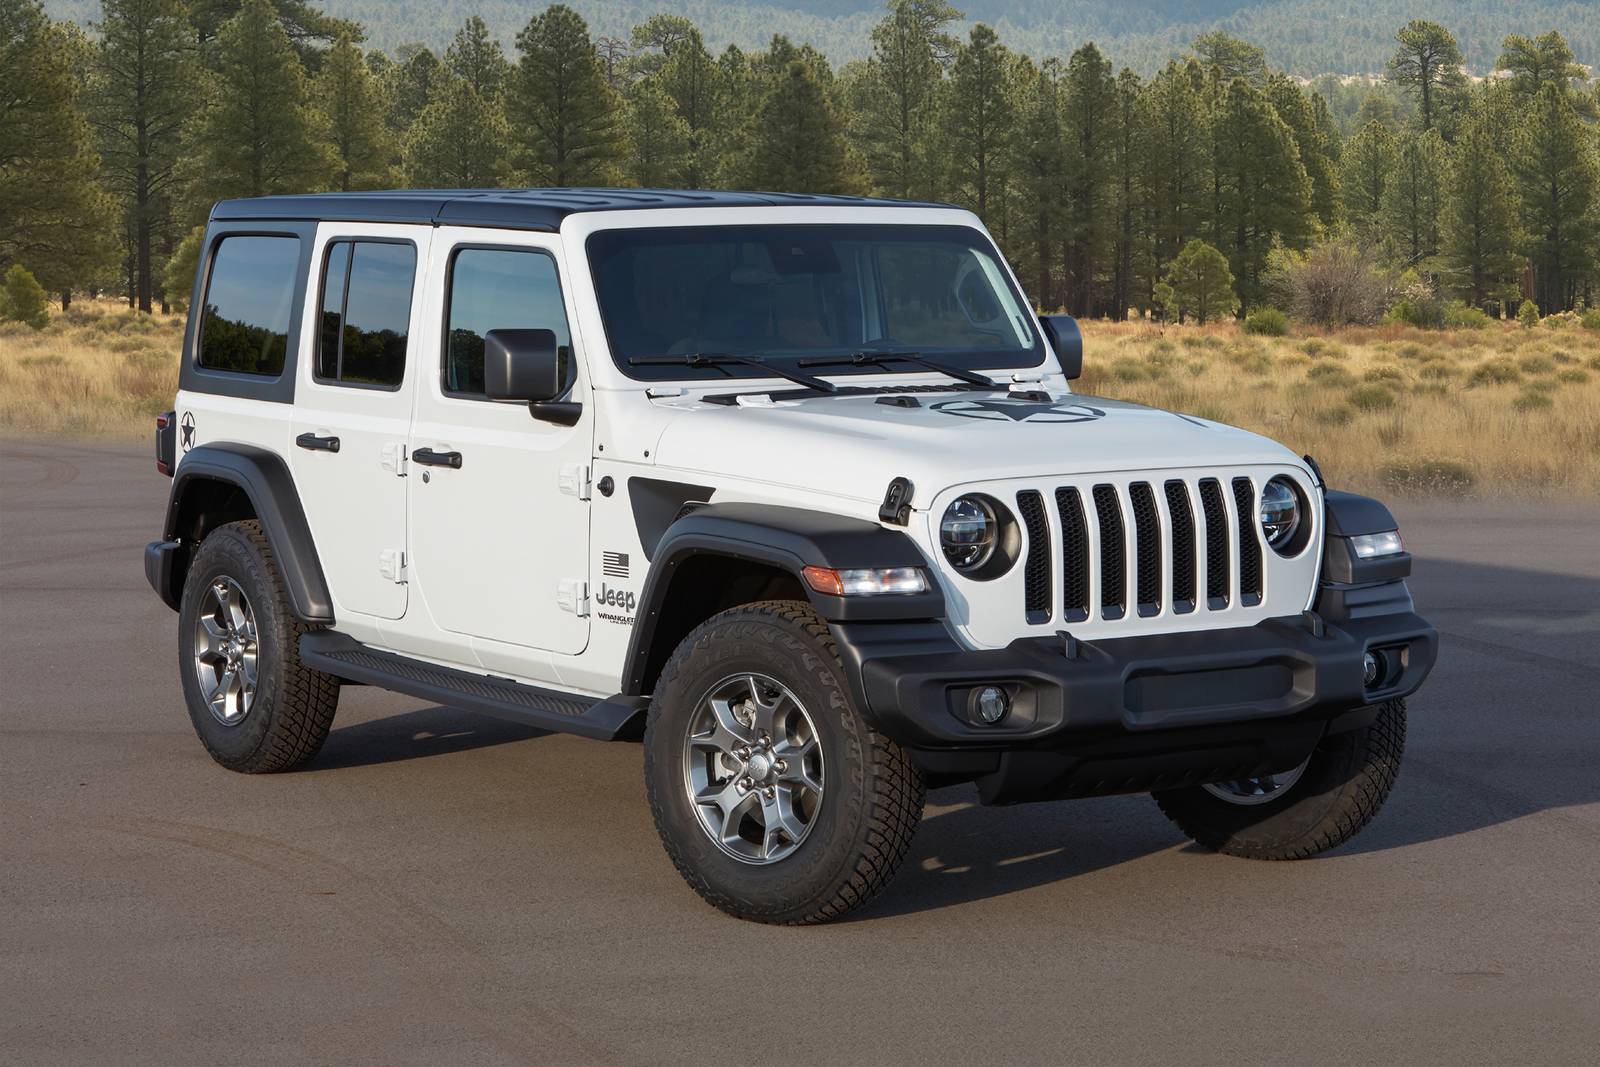 Buy the 2020 Jeep Wrangler in Leominster MA  2020 Jeep SUV